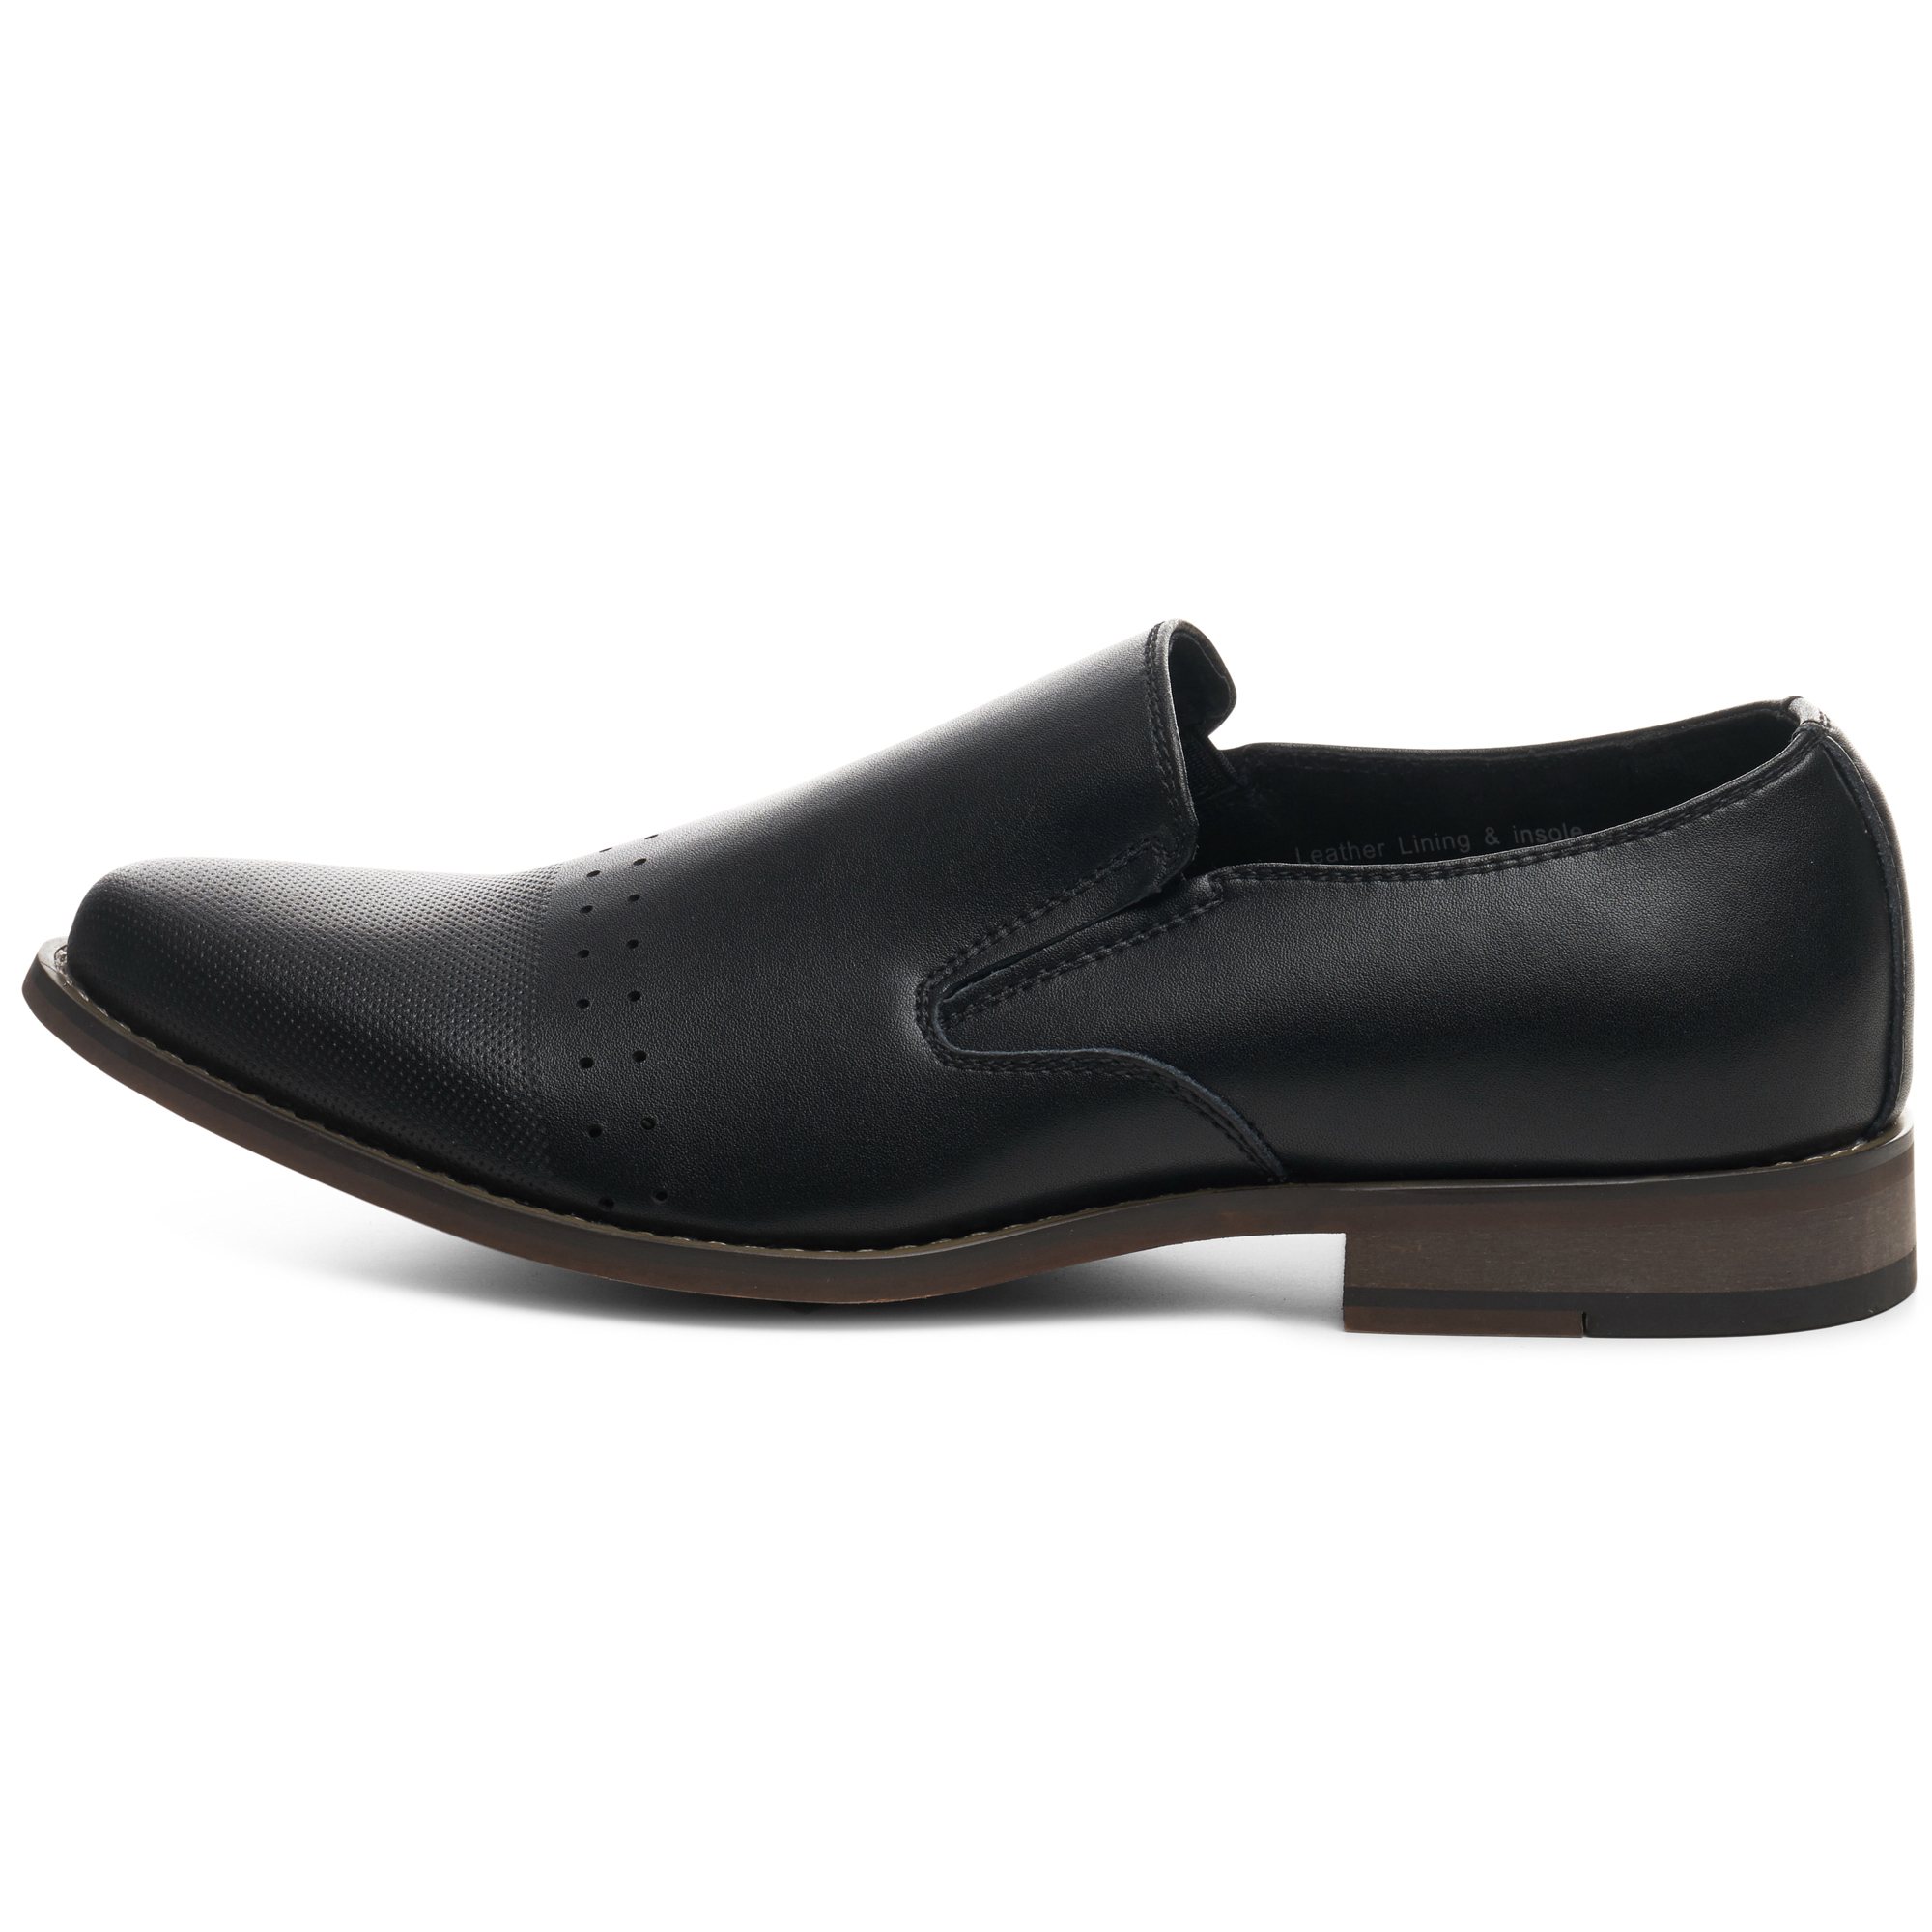 Alpine Swiss Double Diamond Mens Leather Loafers Oxford Slip-on Dress Shoes - image 2 of 7